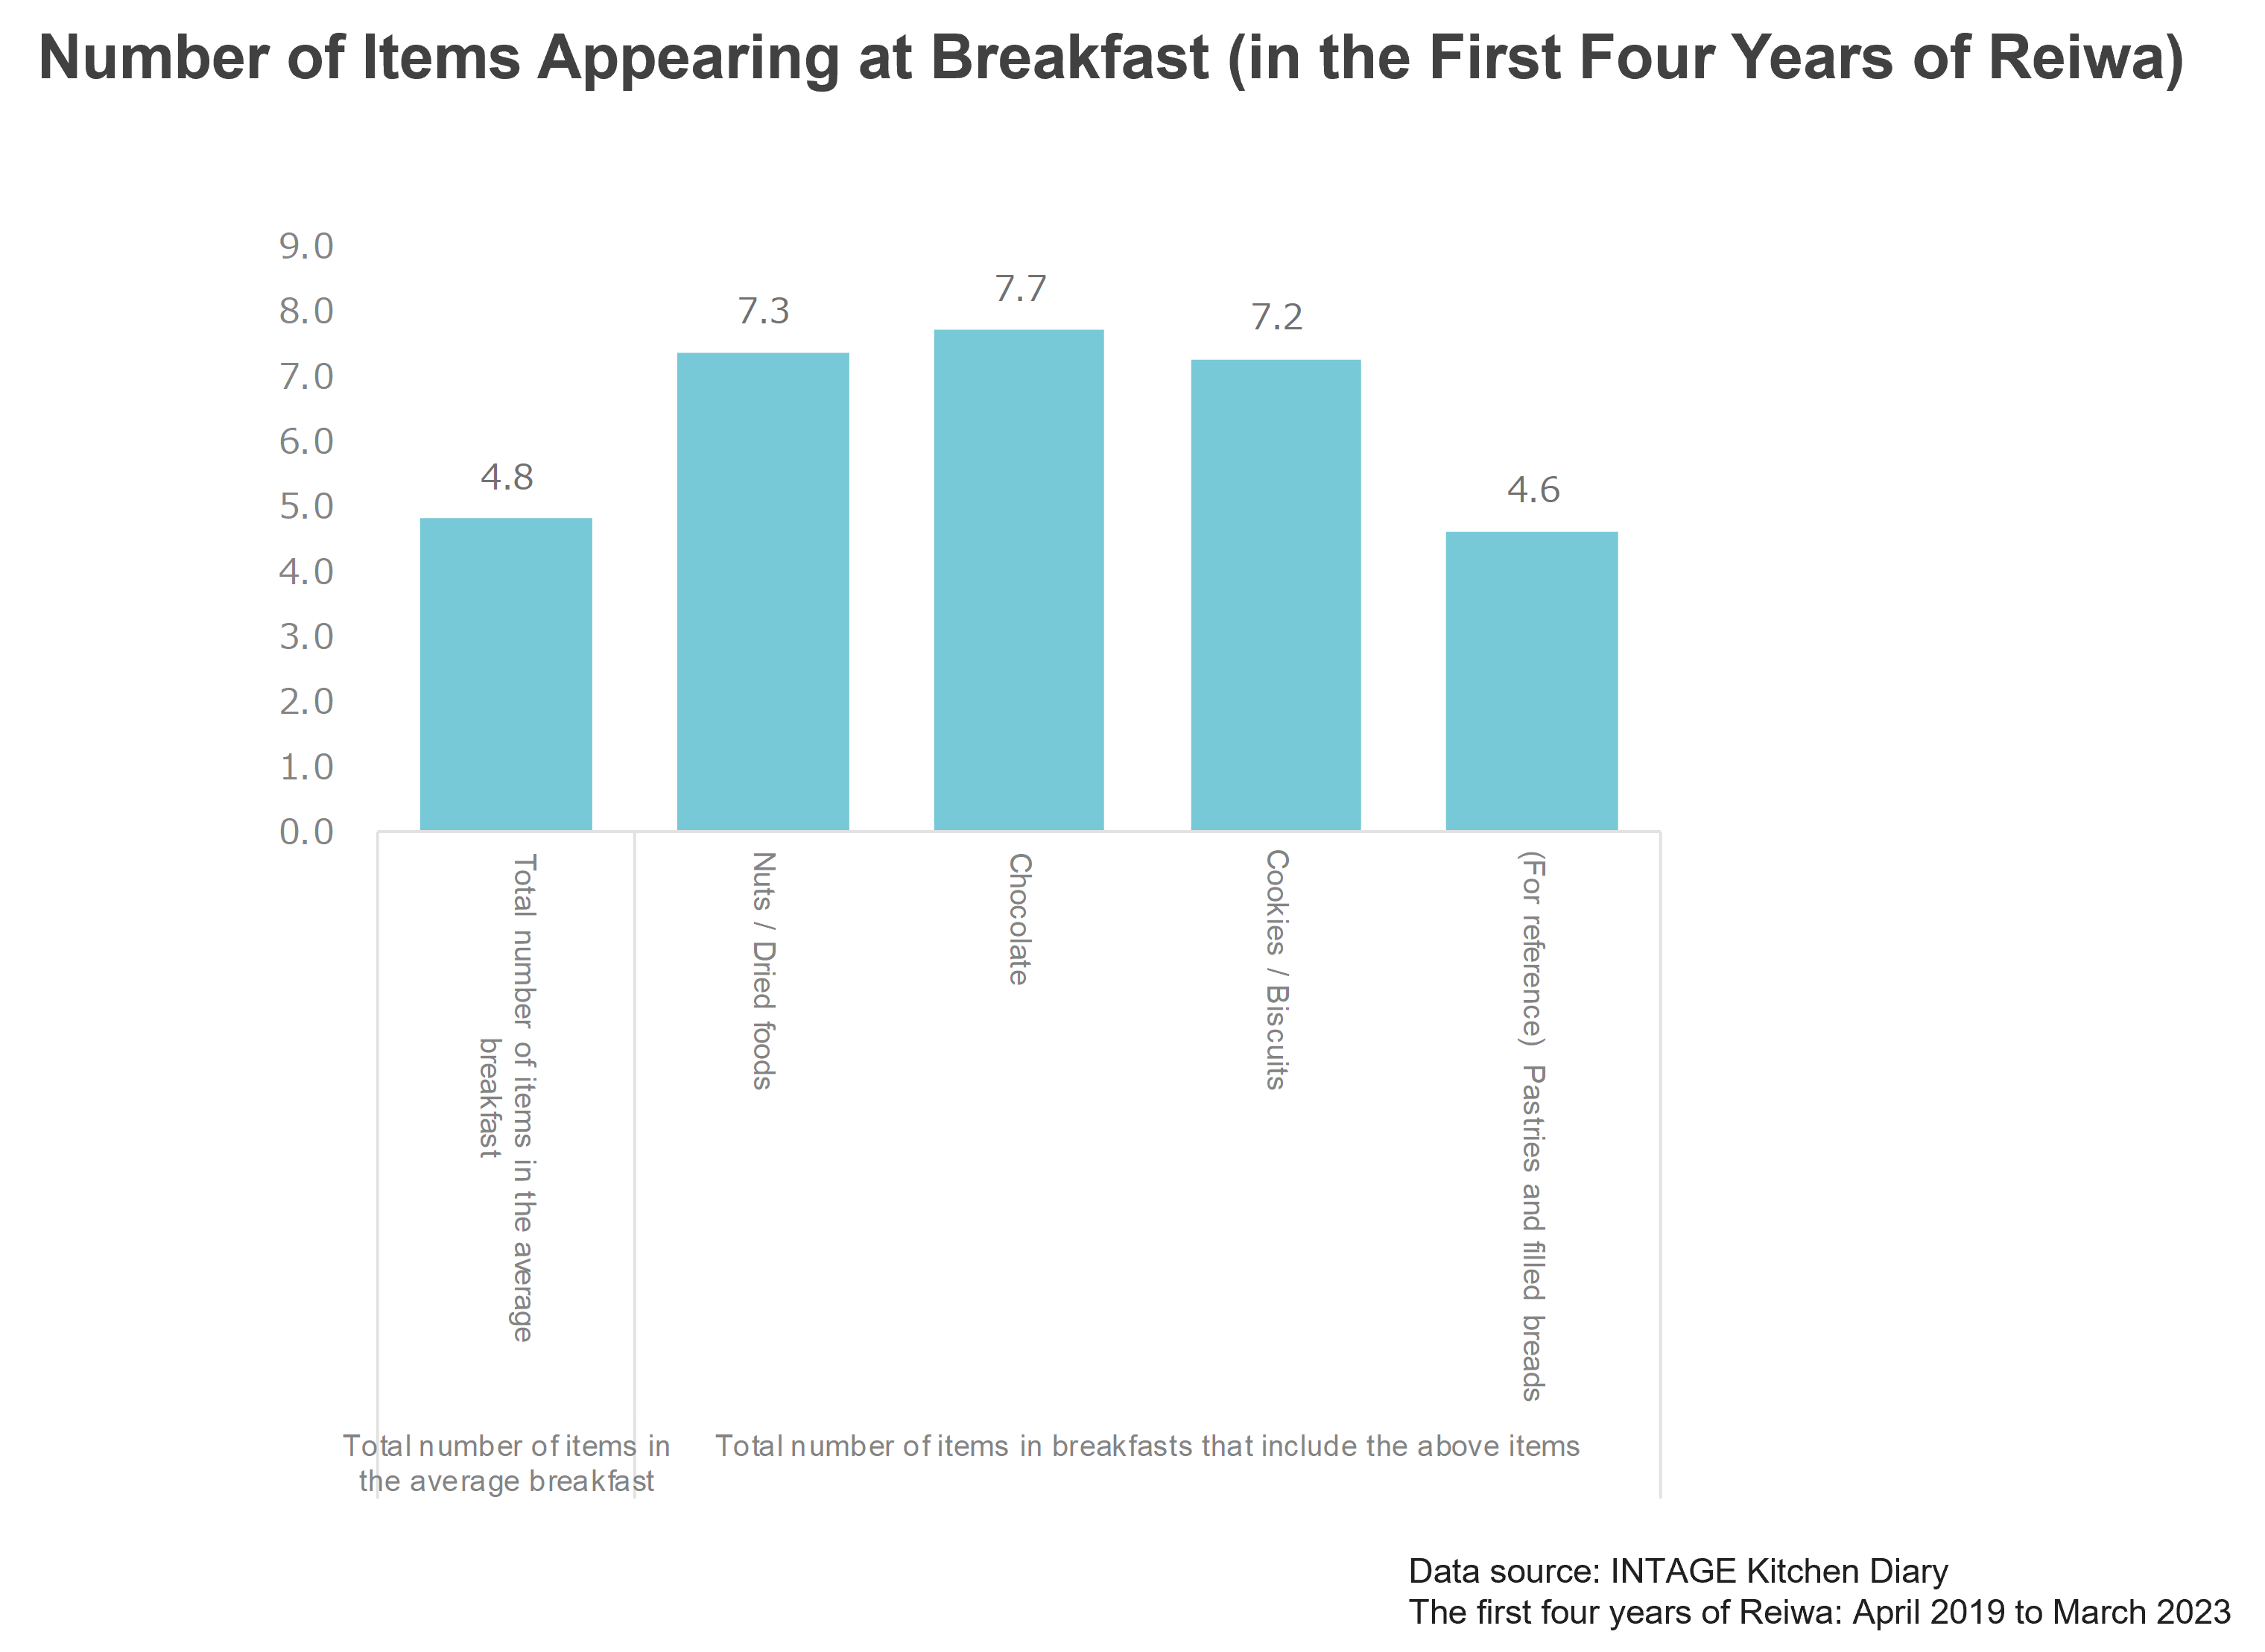 Number of Items Appearing at Breakfast(in the First Four Years of Reiwa)